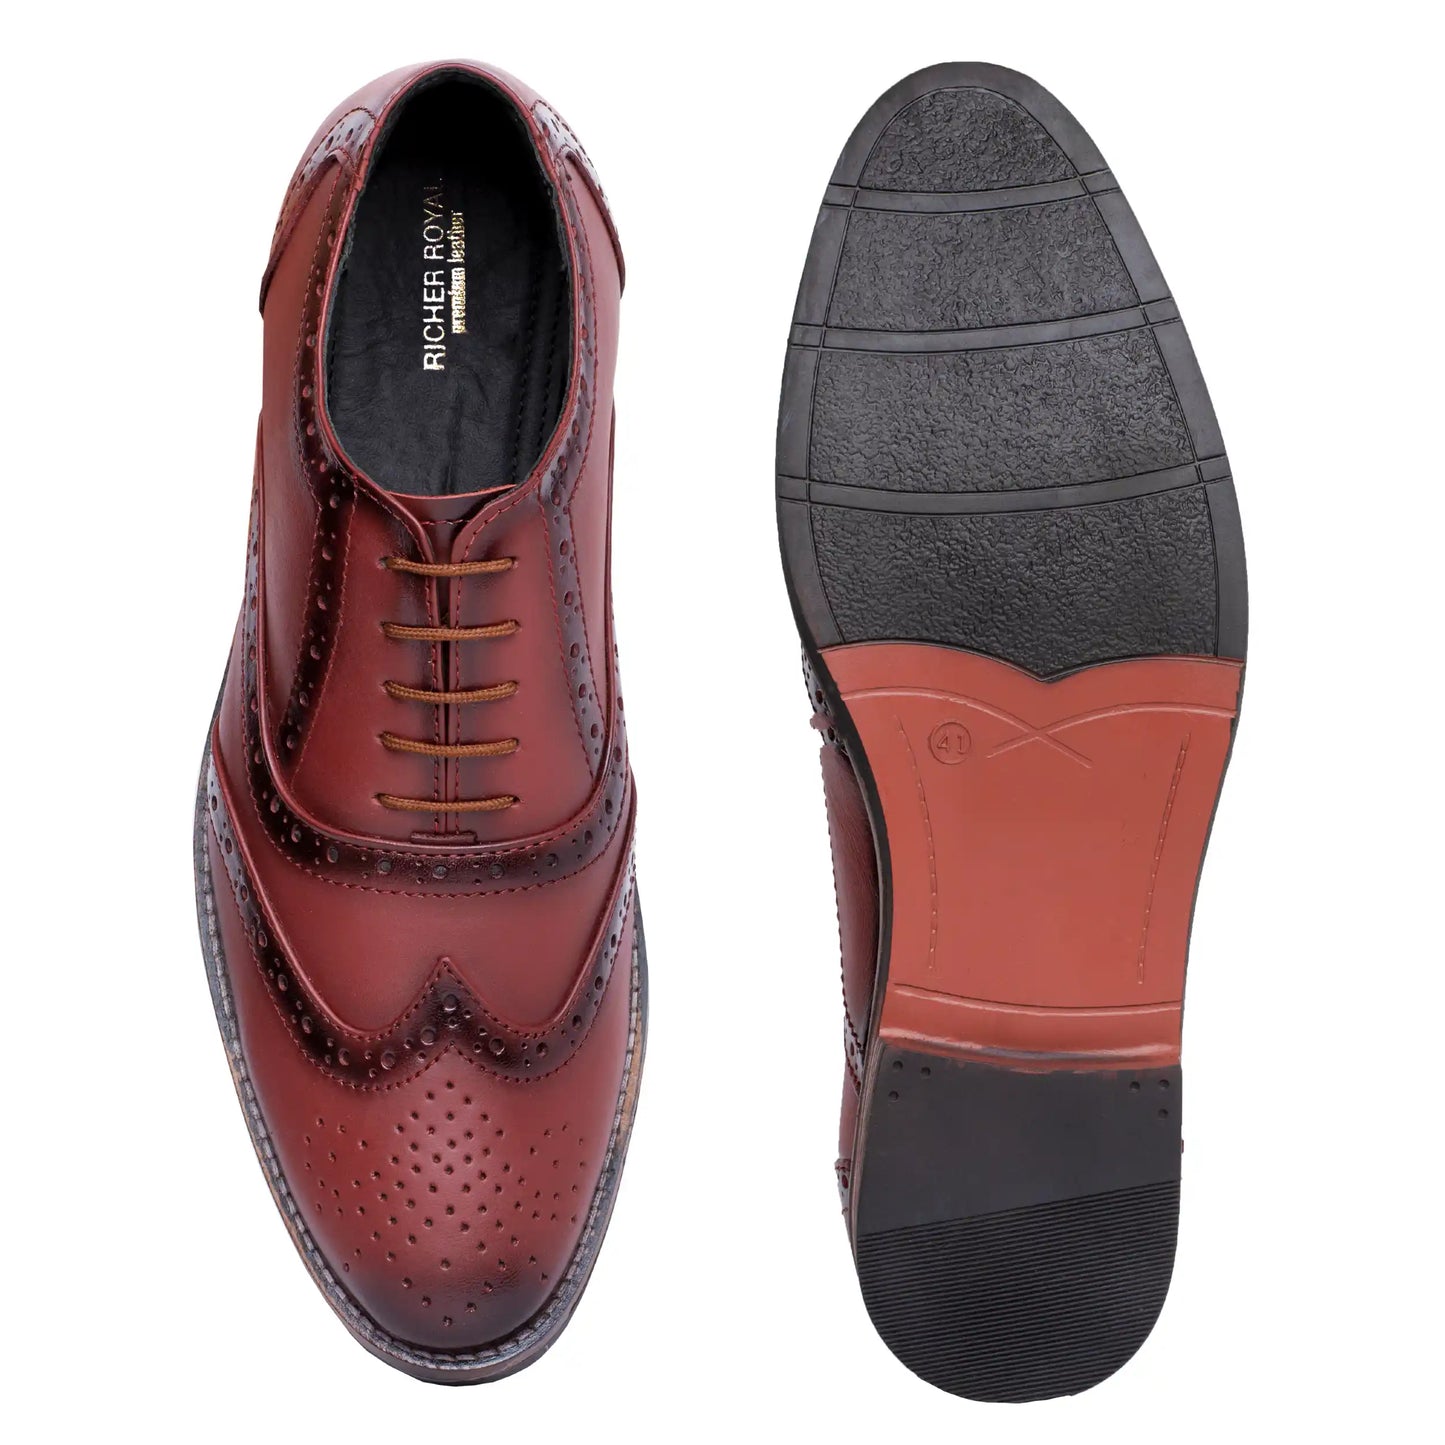 Men Pure Leather WingTip Oxford Brogue Shoes